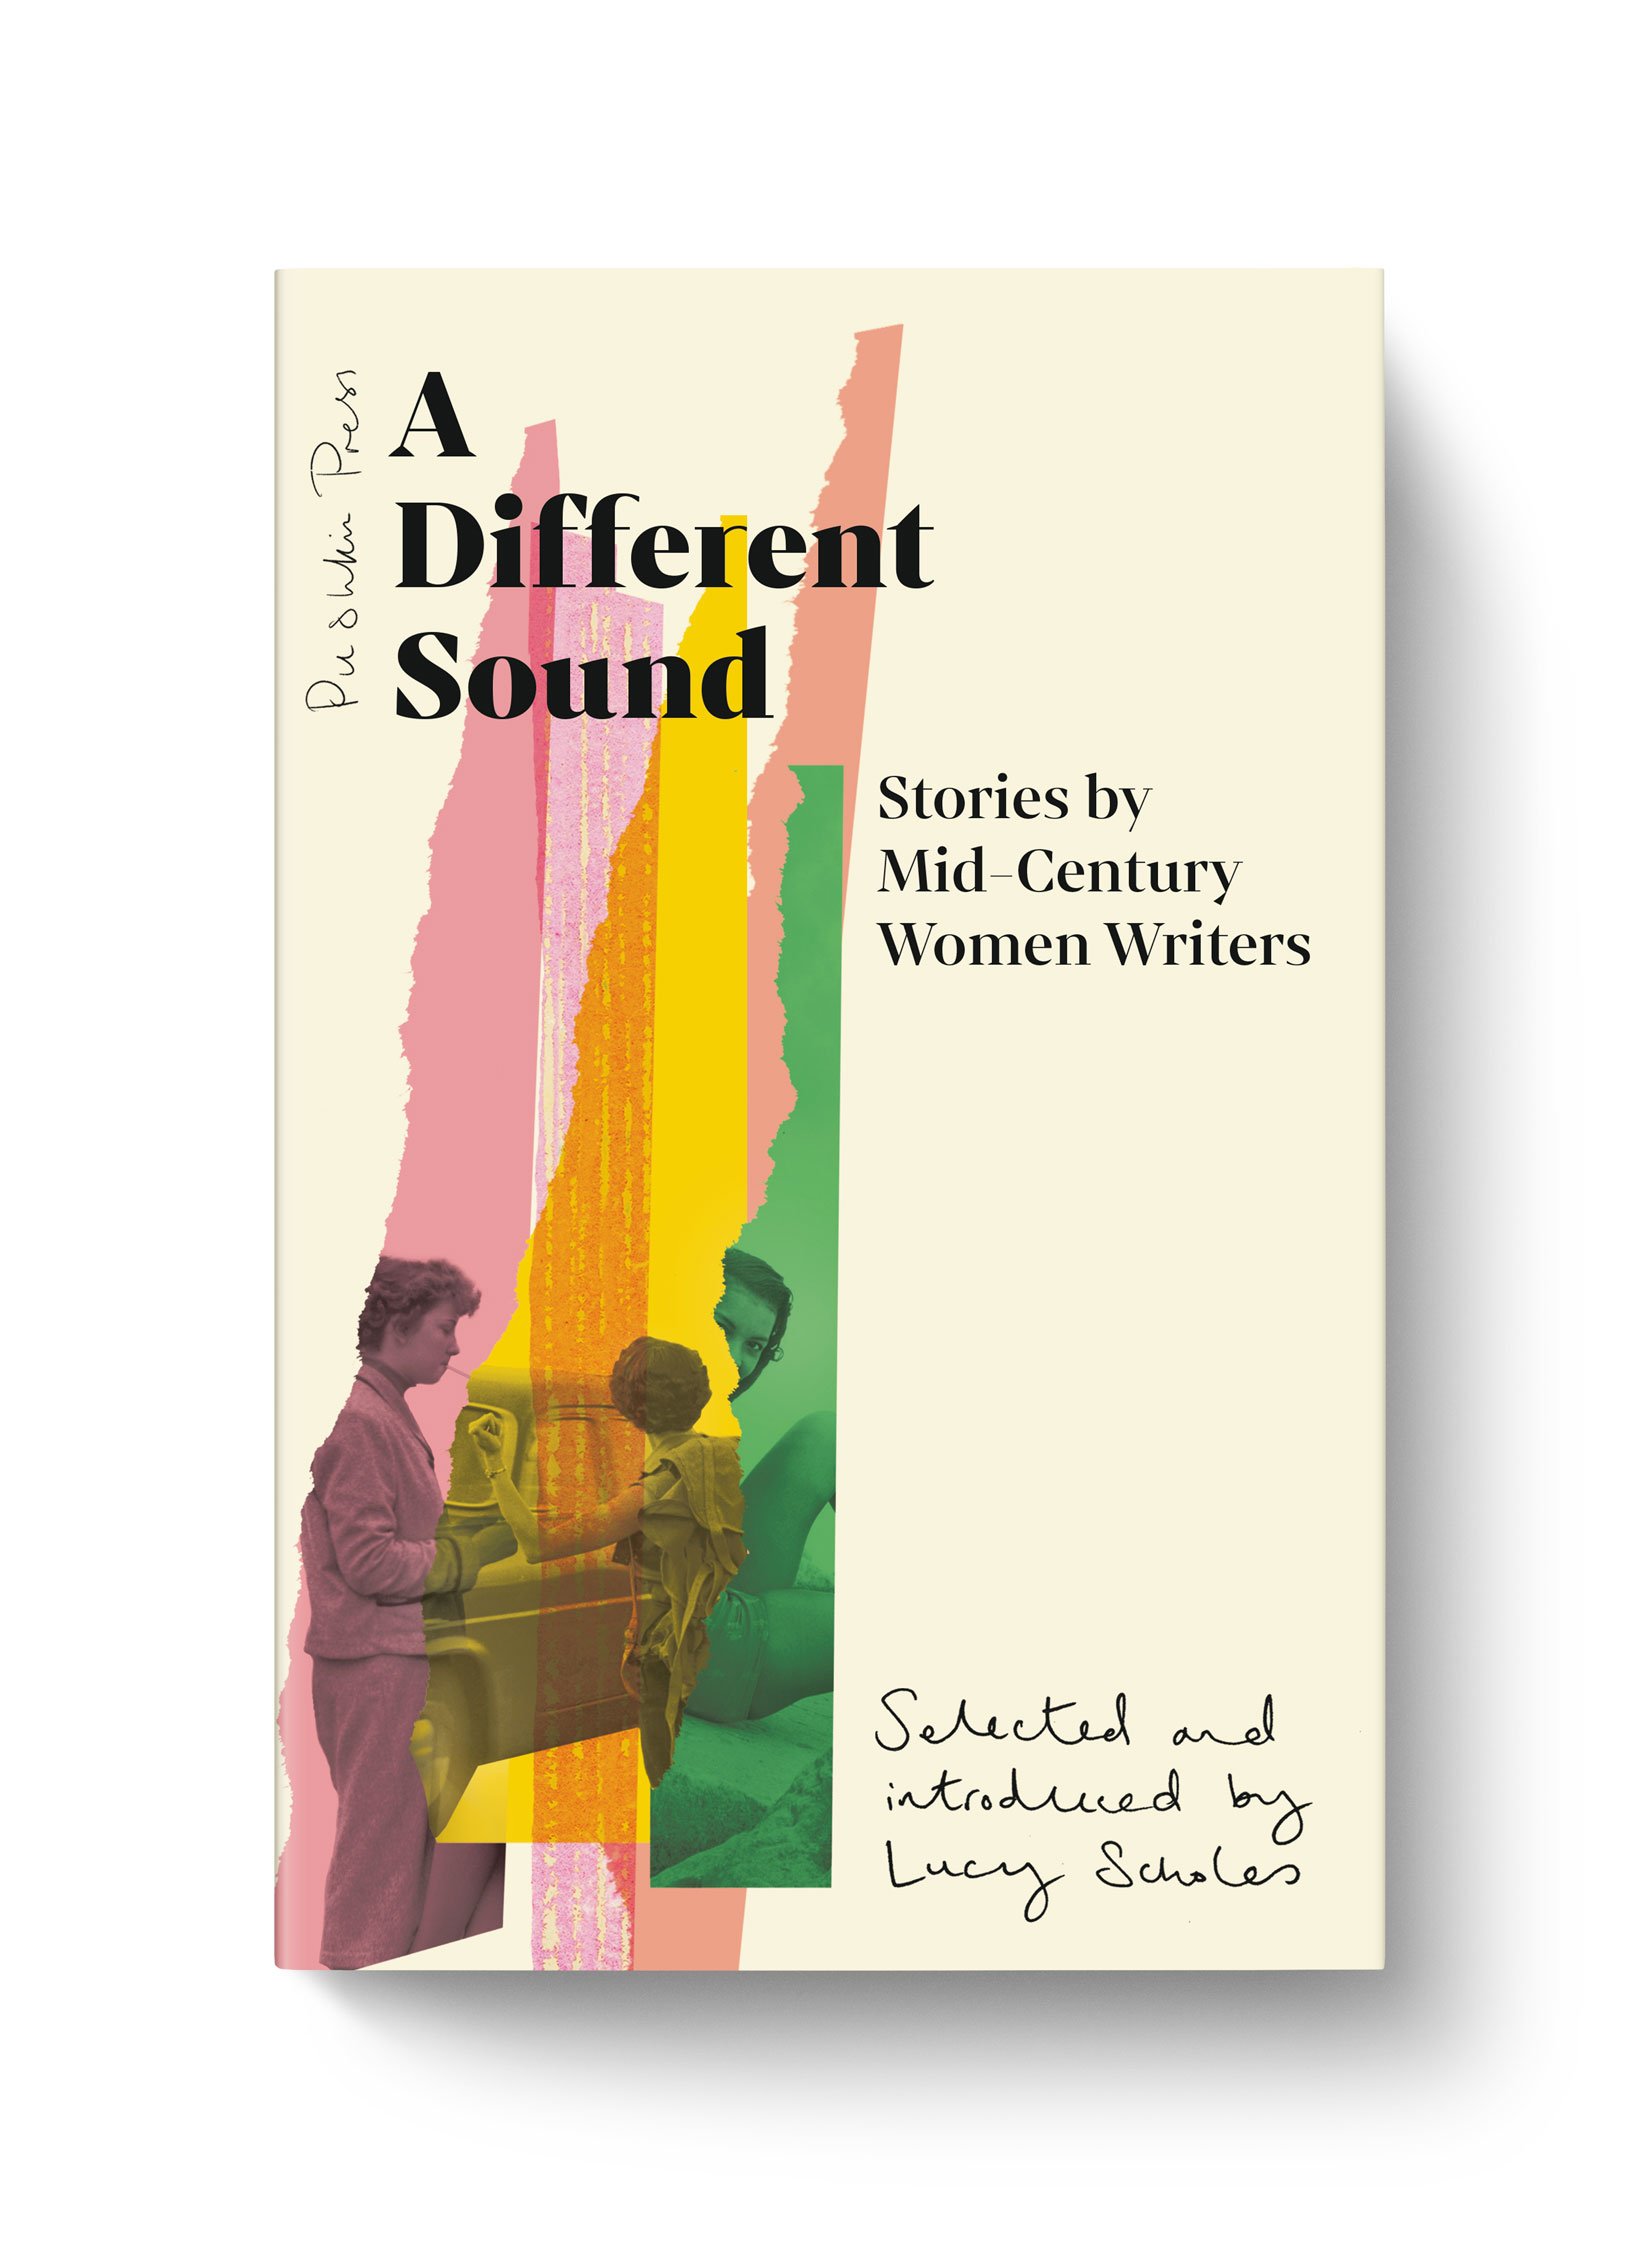   A Different Sound  Selected and introduced by Lucy Scholes  Pushkin Press 